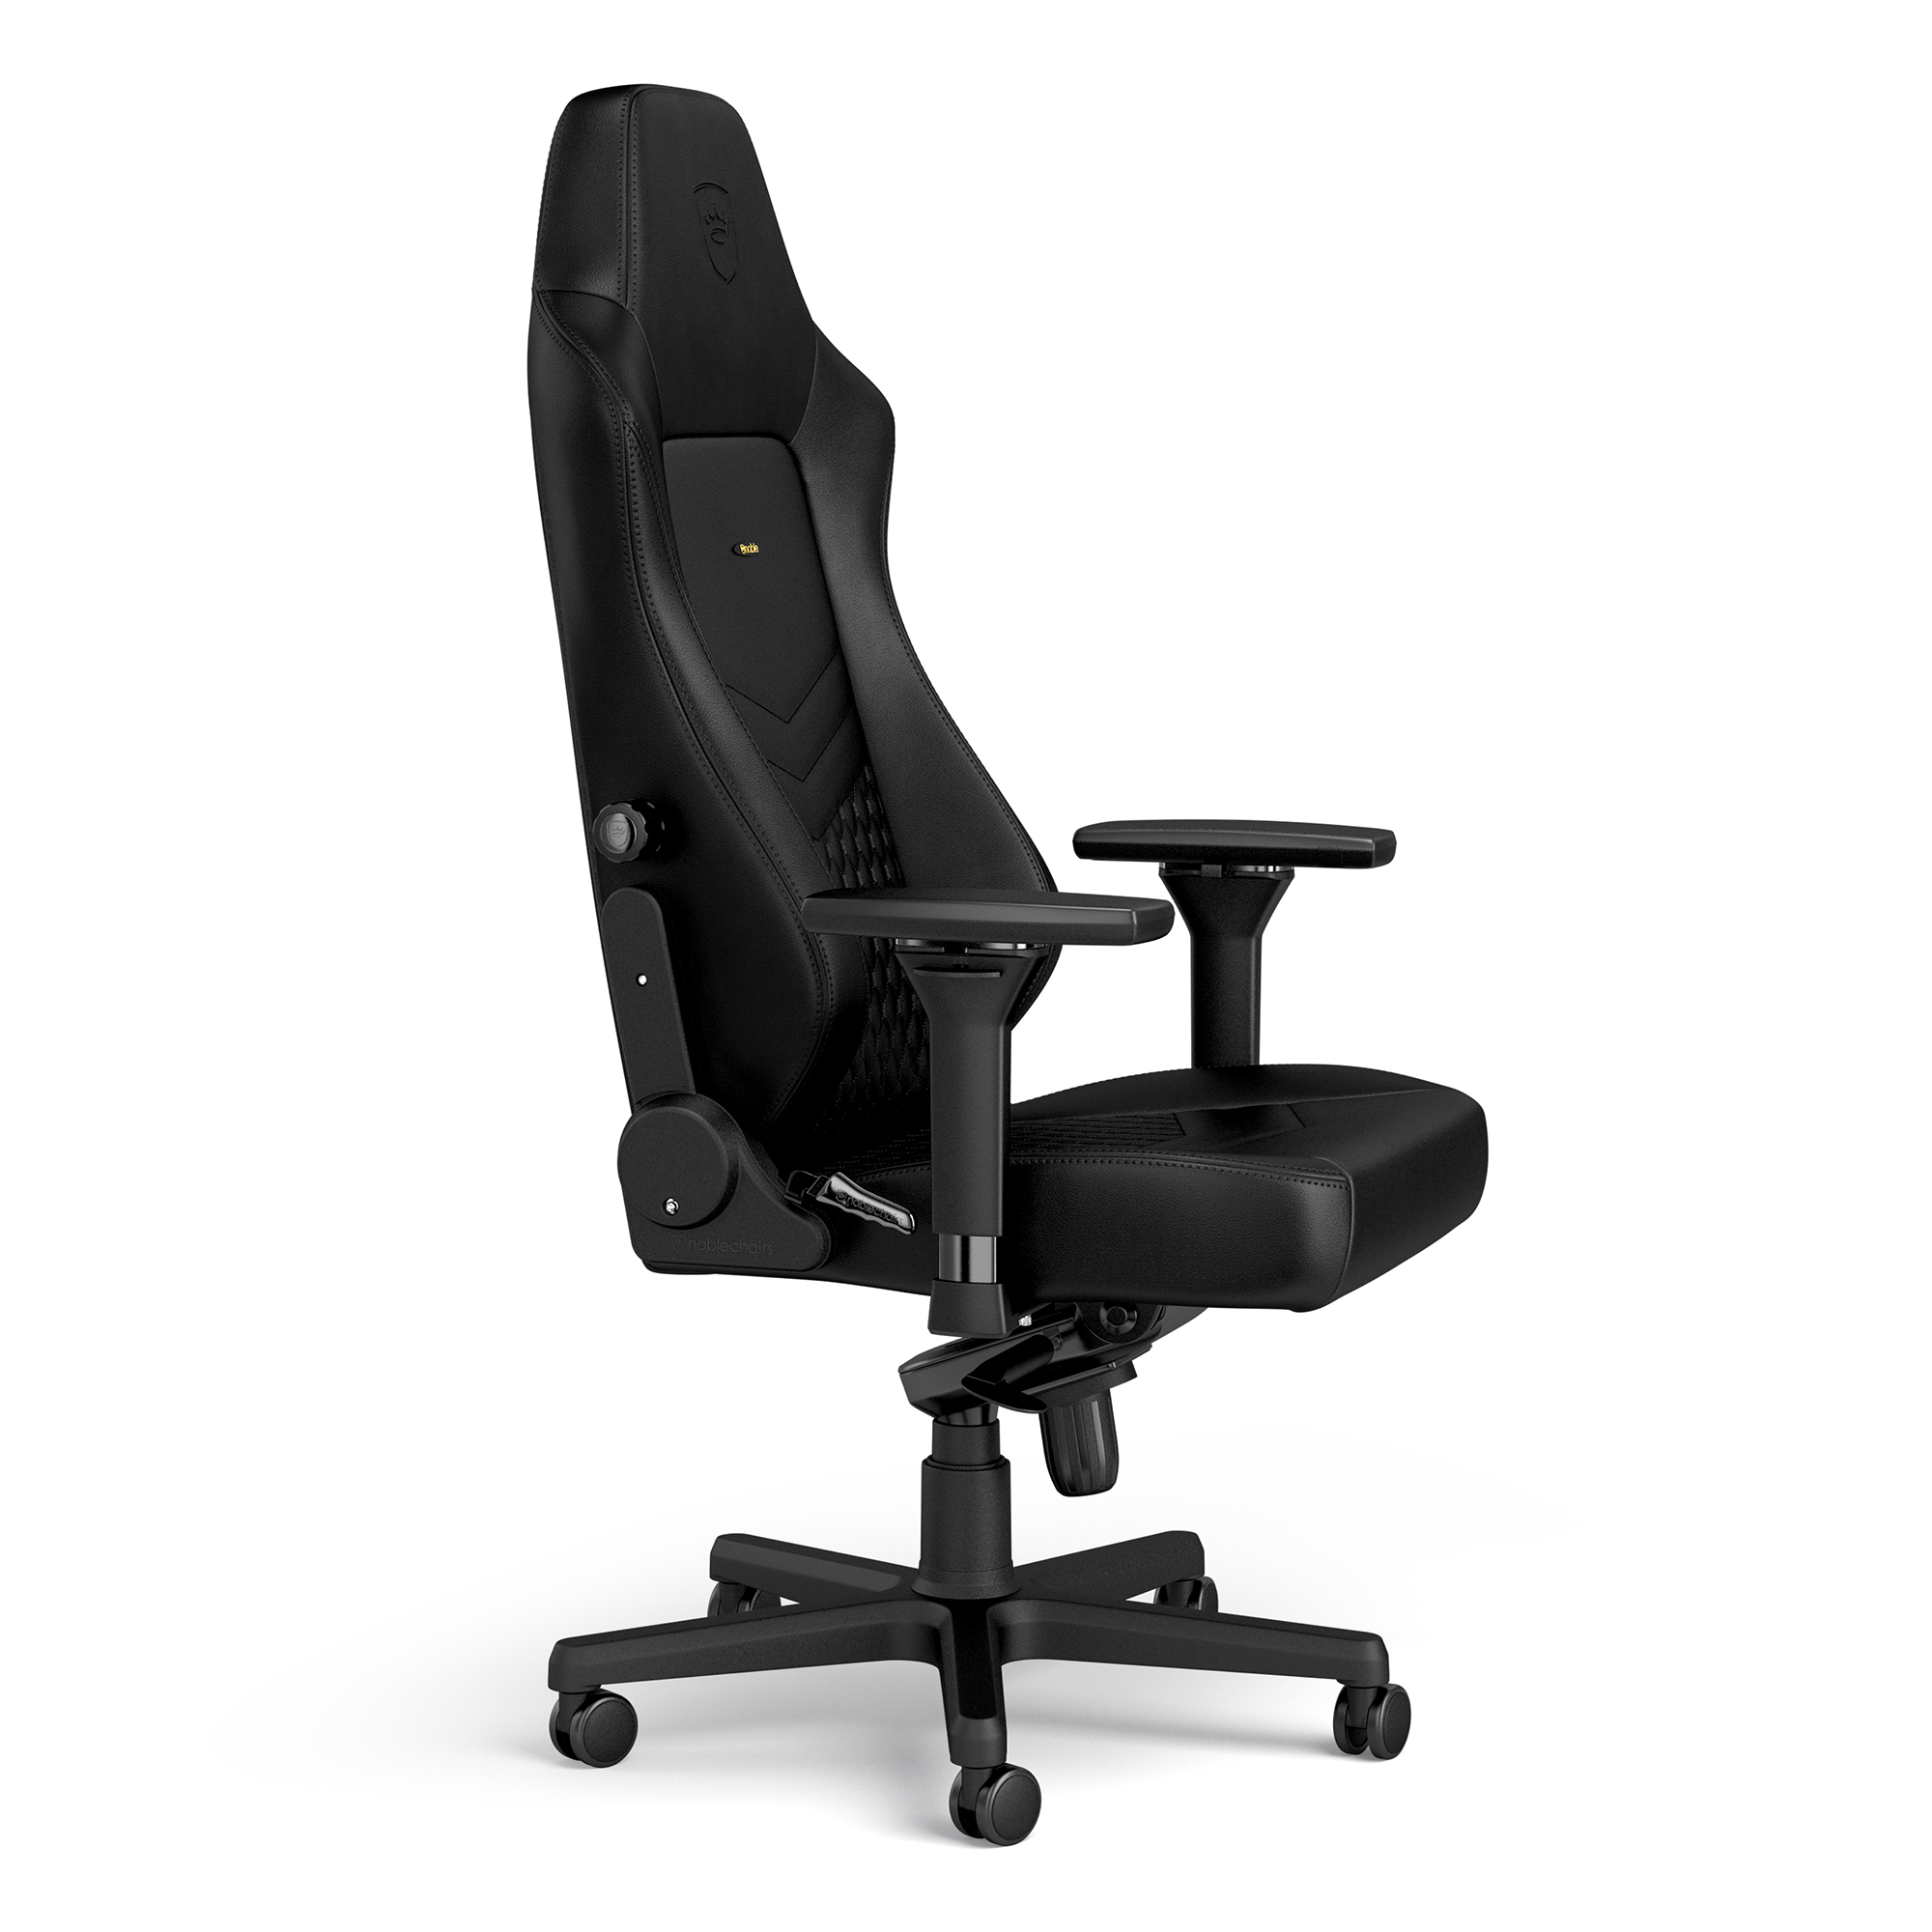 noblechairs - noblechairs HERO Real Leather Gaming Chair - Black